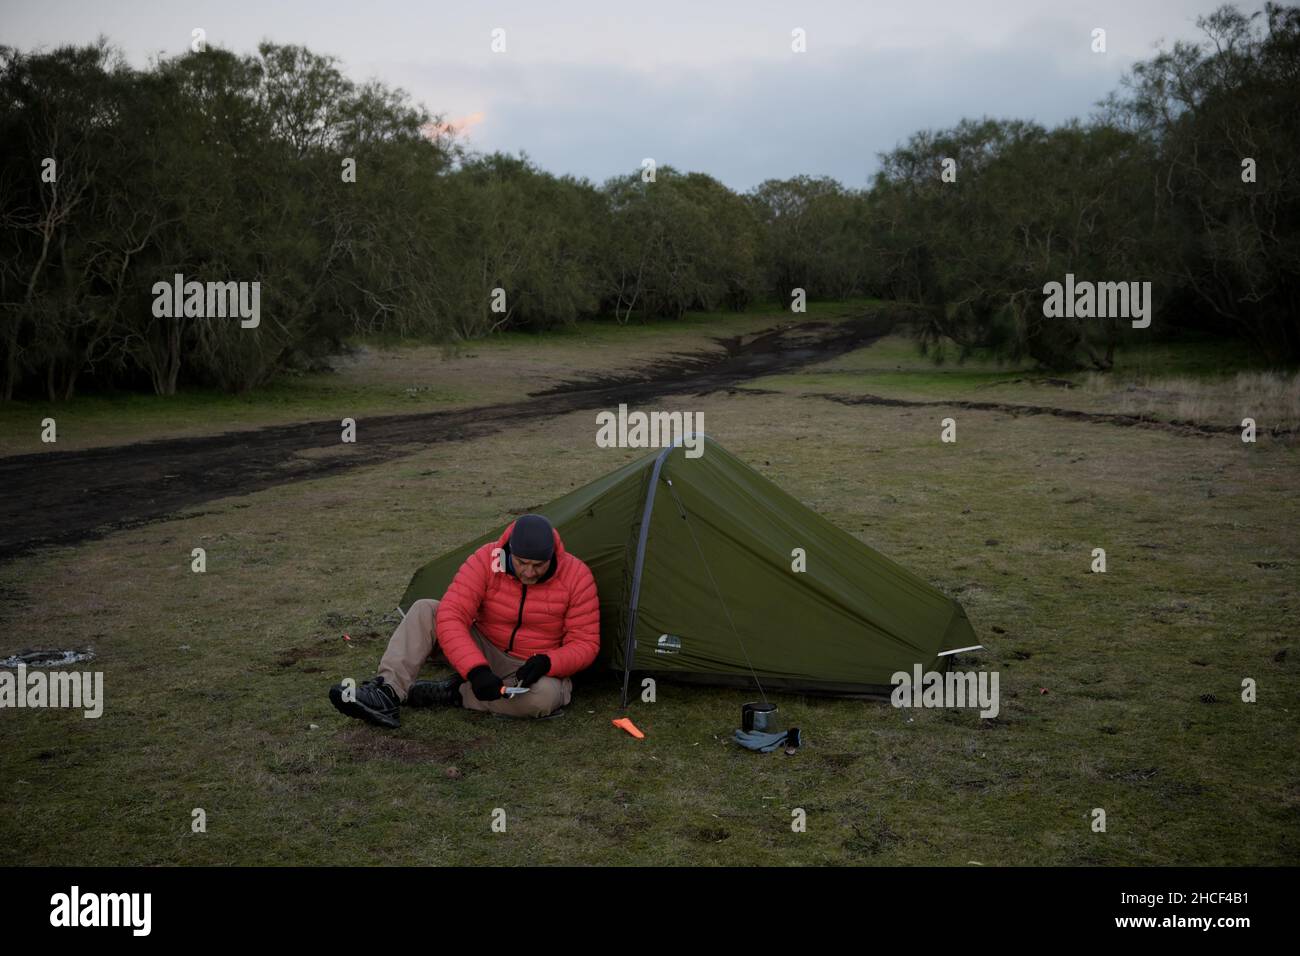 wild camp and survival skills in outdoor activity a man is sharpening a wooden branch sitting in front of tent Stock Photo